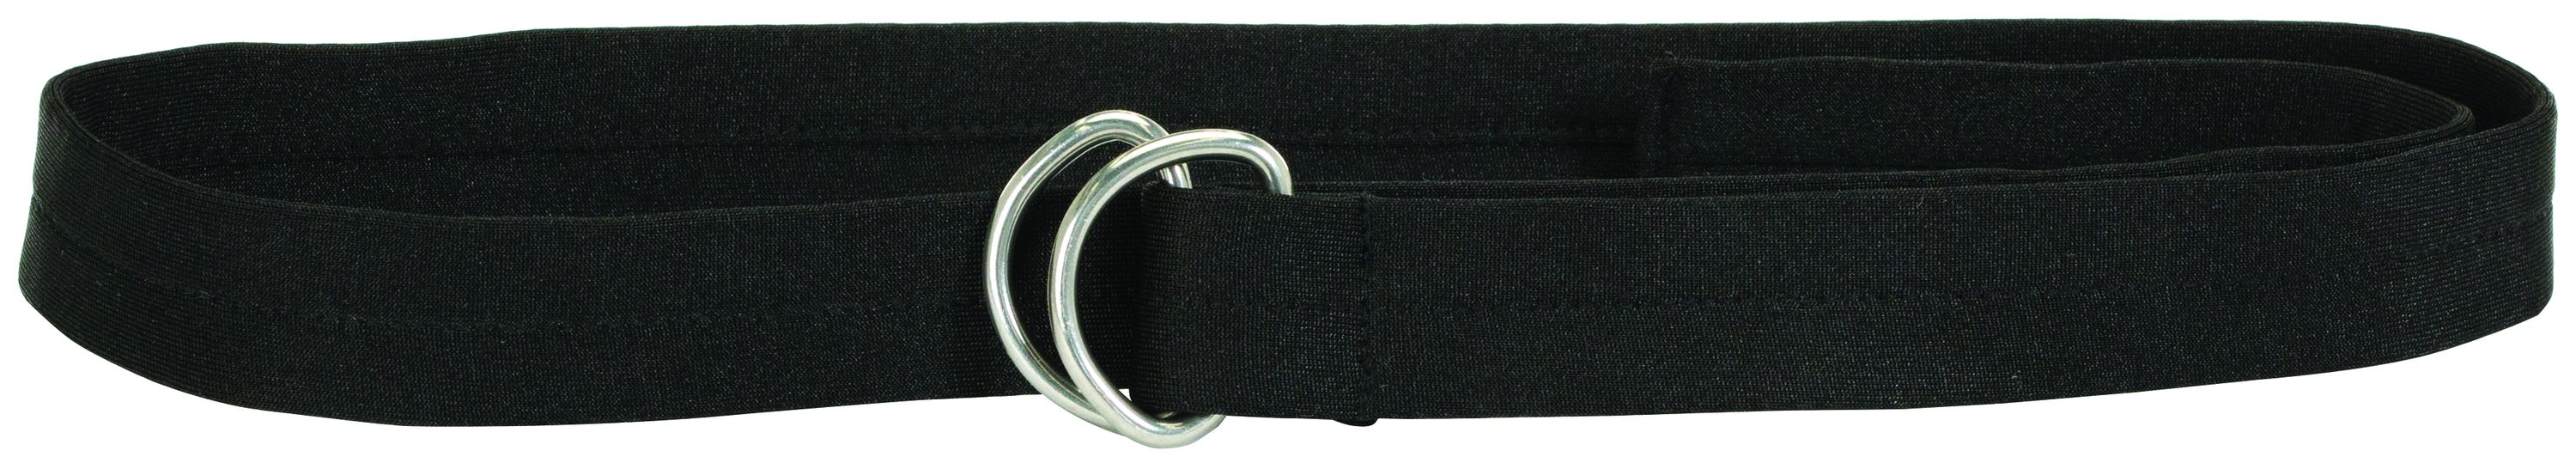 Youth Covered Football Belt